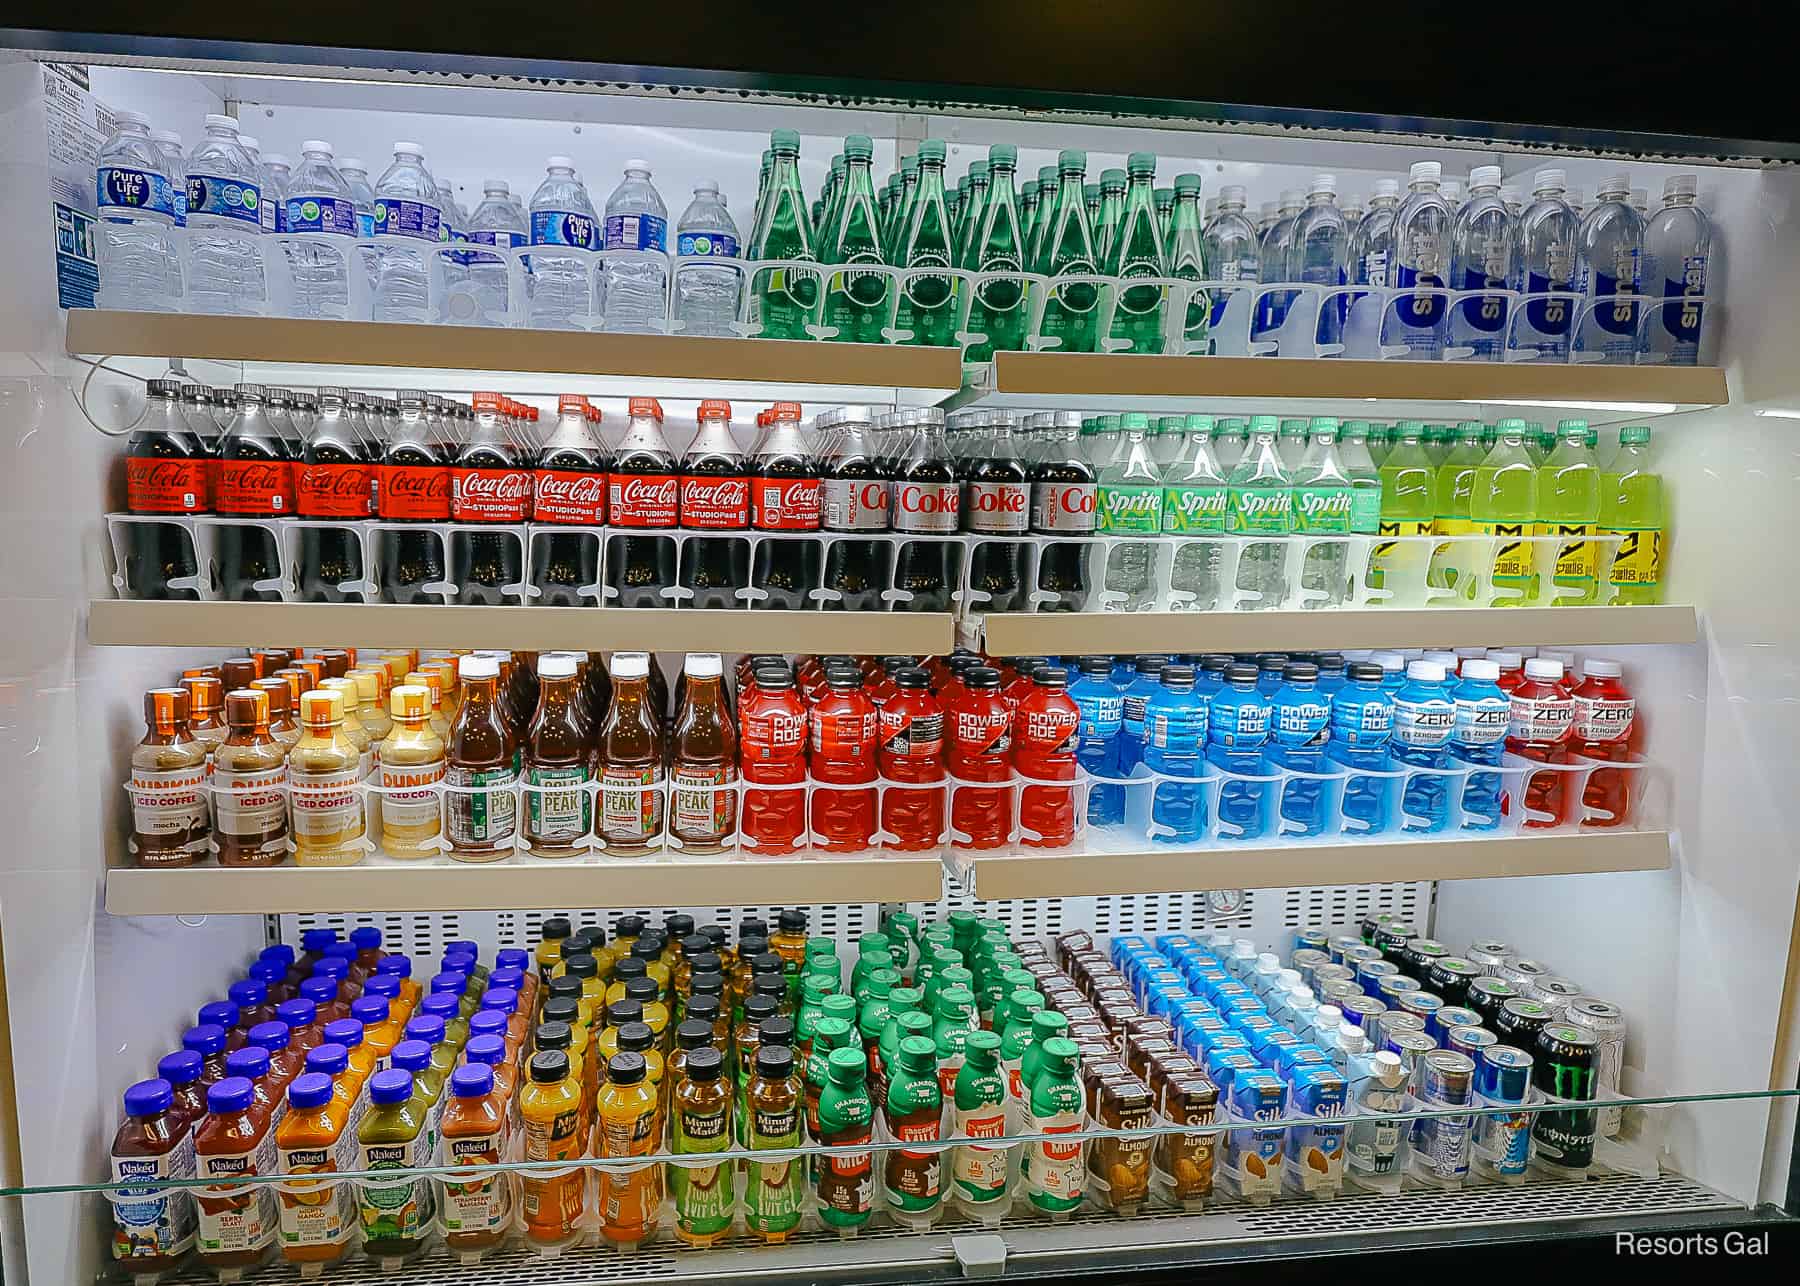 Bottled Coca-Cola products, Powerade, Juice, Milk, and more 